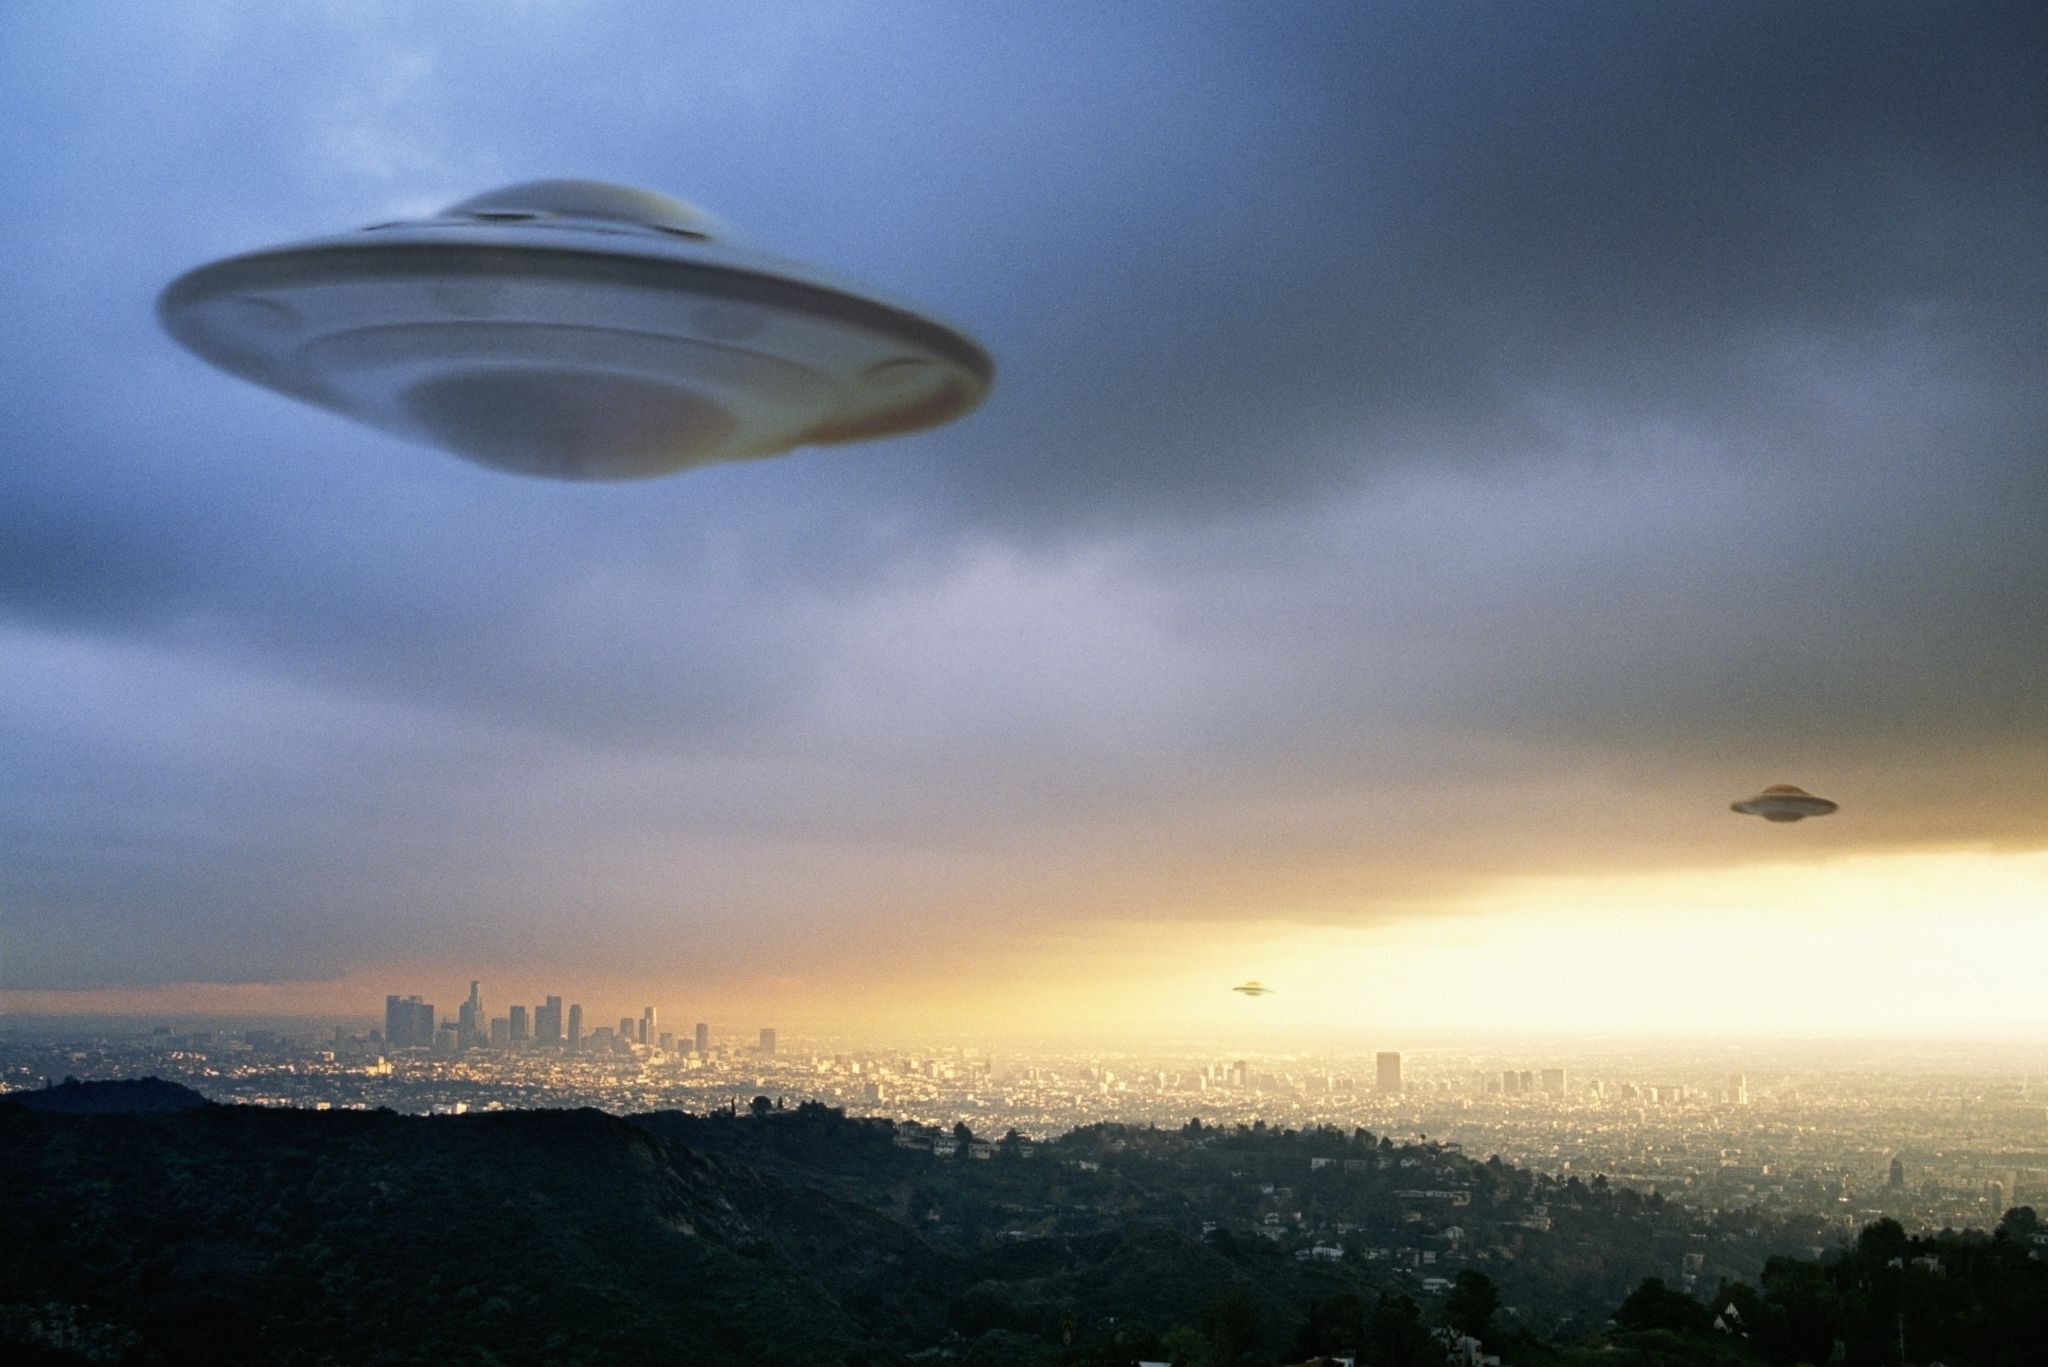 California is the top state with most UFO sightings, say UFO experts